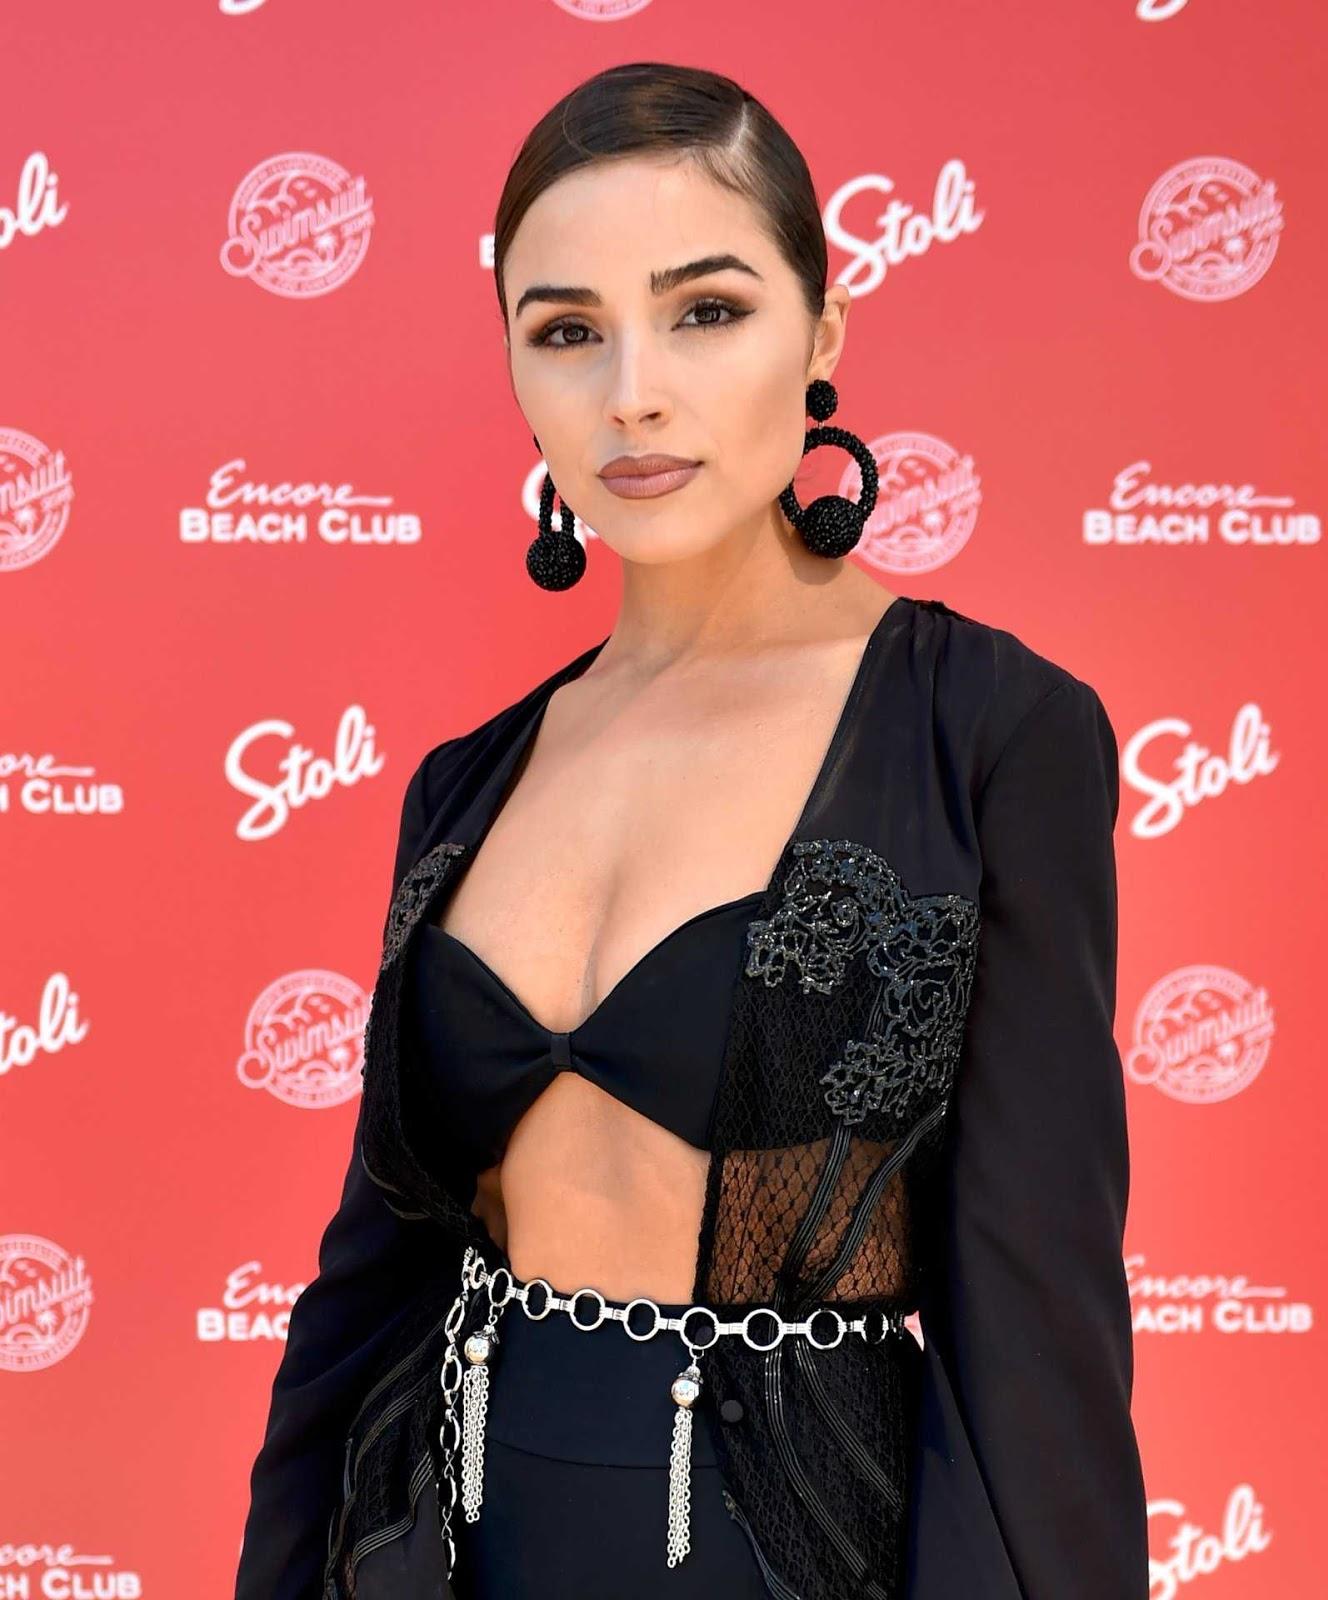 39 Hot Pictures Of Olivia Culpo Are Here To Get Your Blood Boiling For Her | Best Of Comic Books